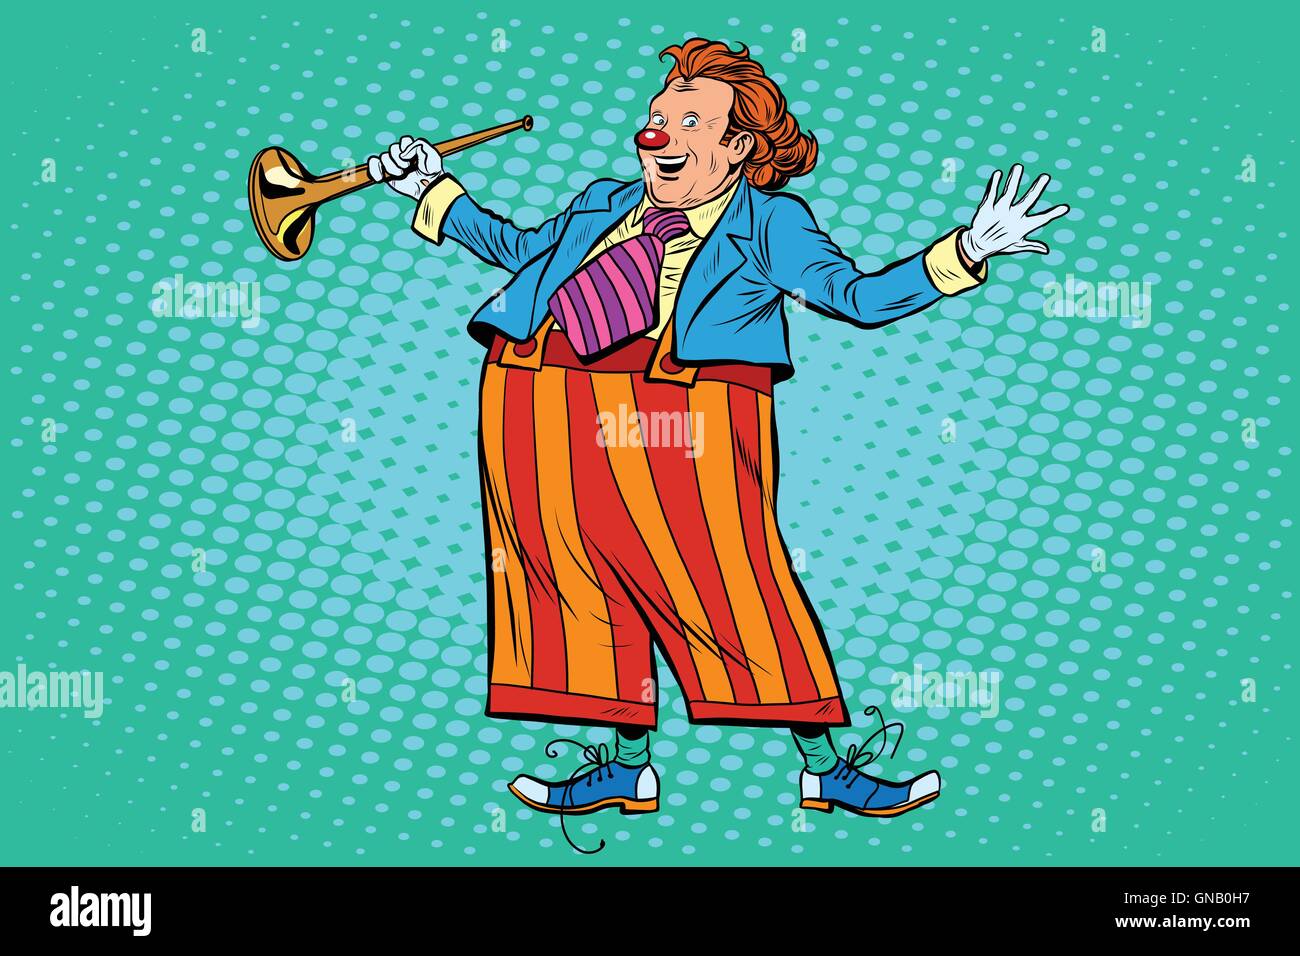 Clown show Stock Vector Images - Alamy